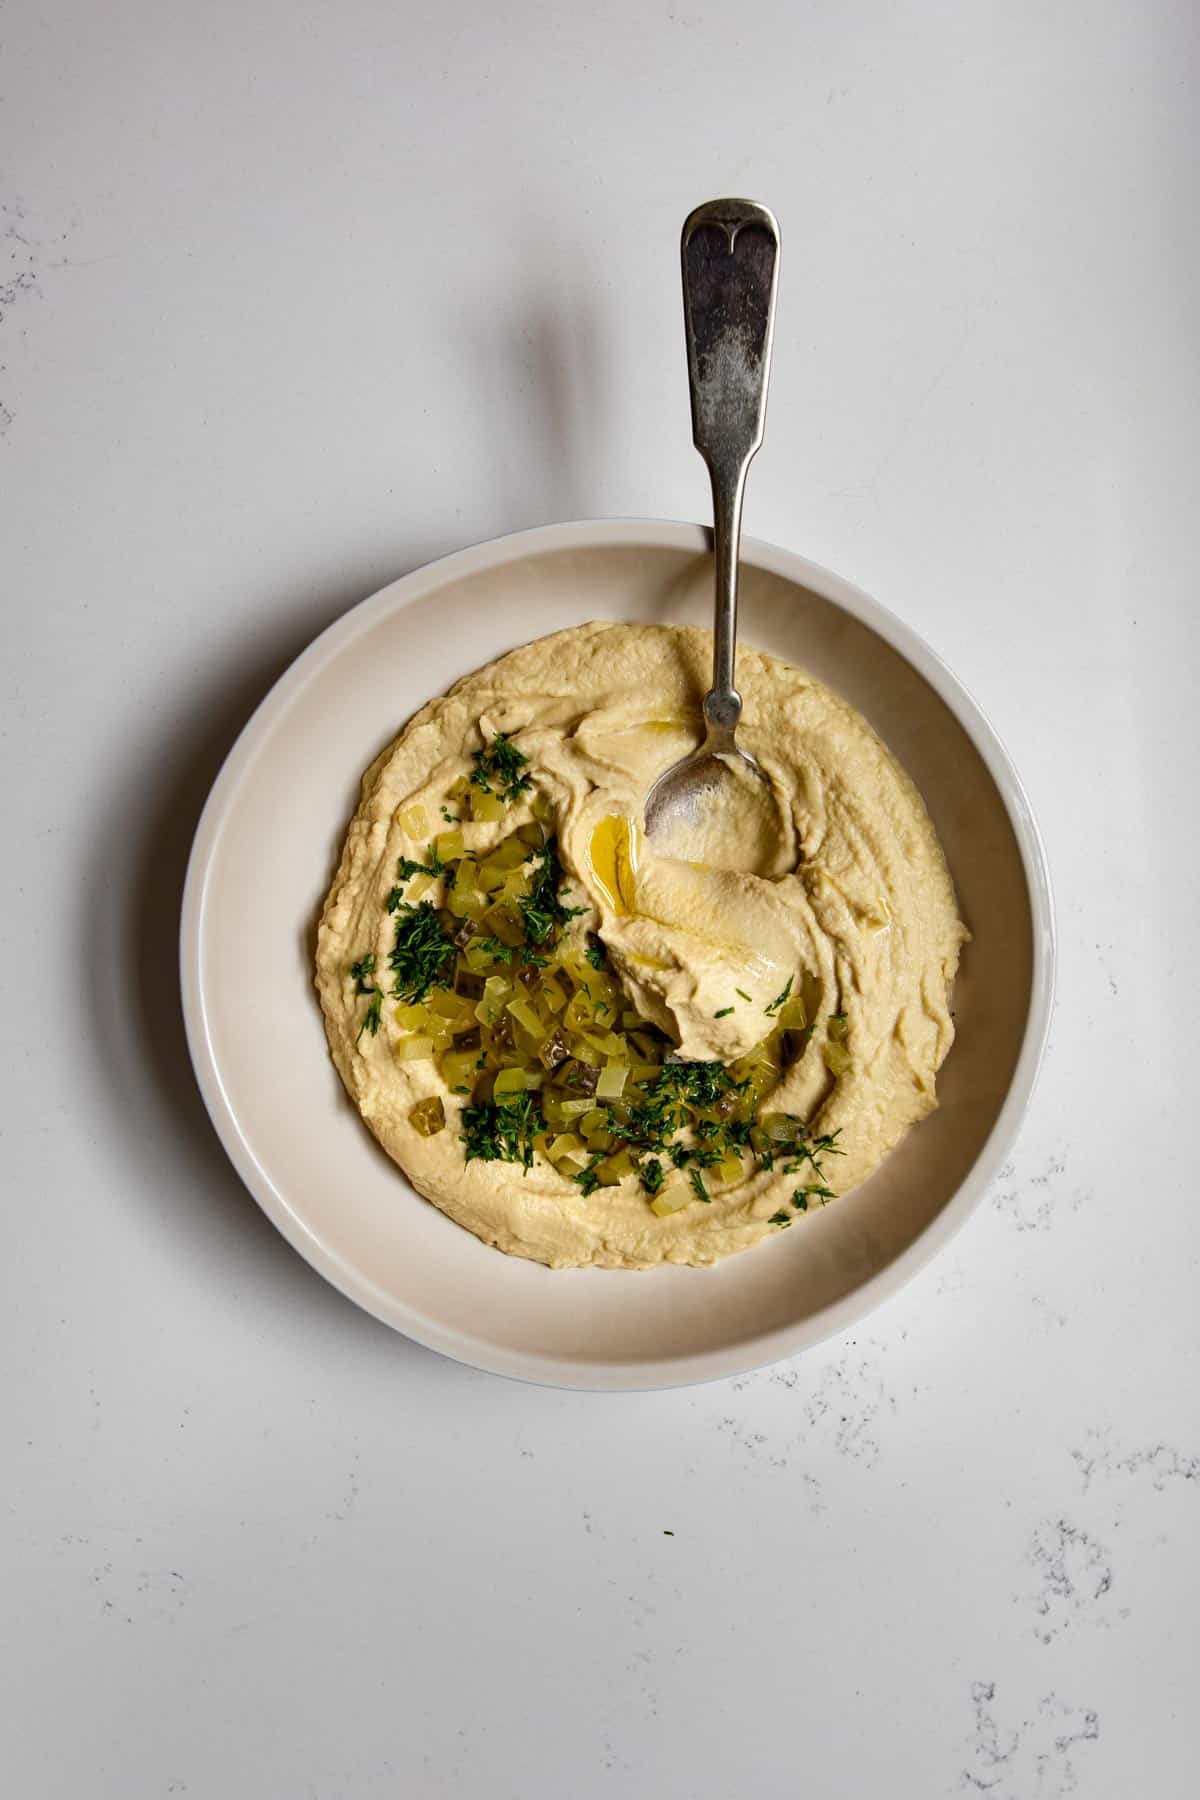 creamy hummus on a plate topped with dill pickles and dill with a spoon.